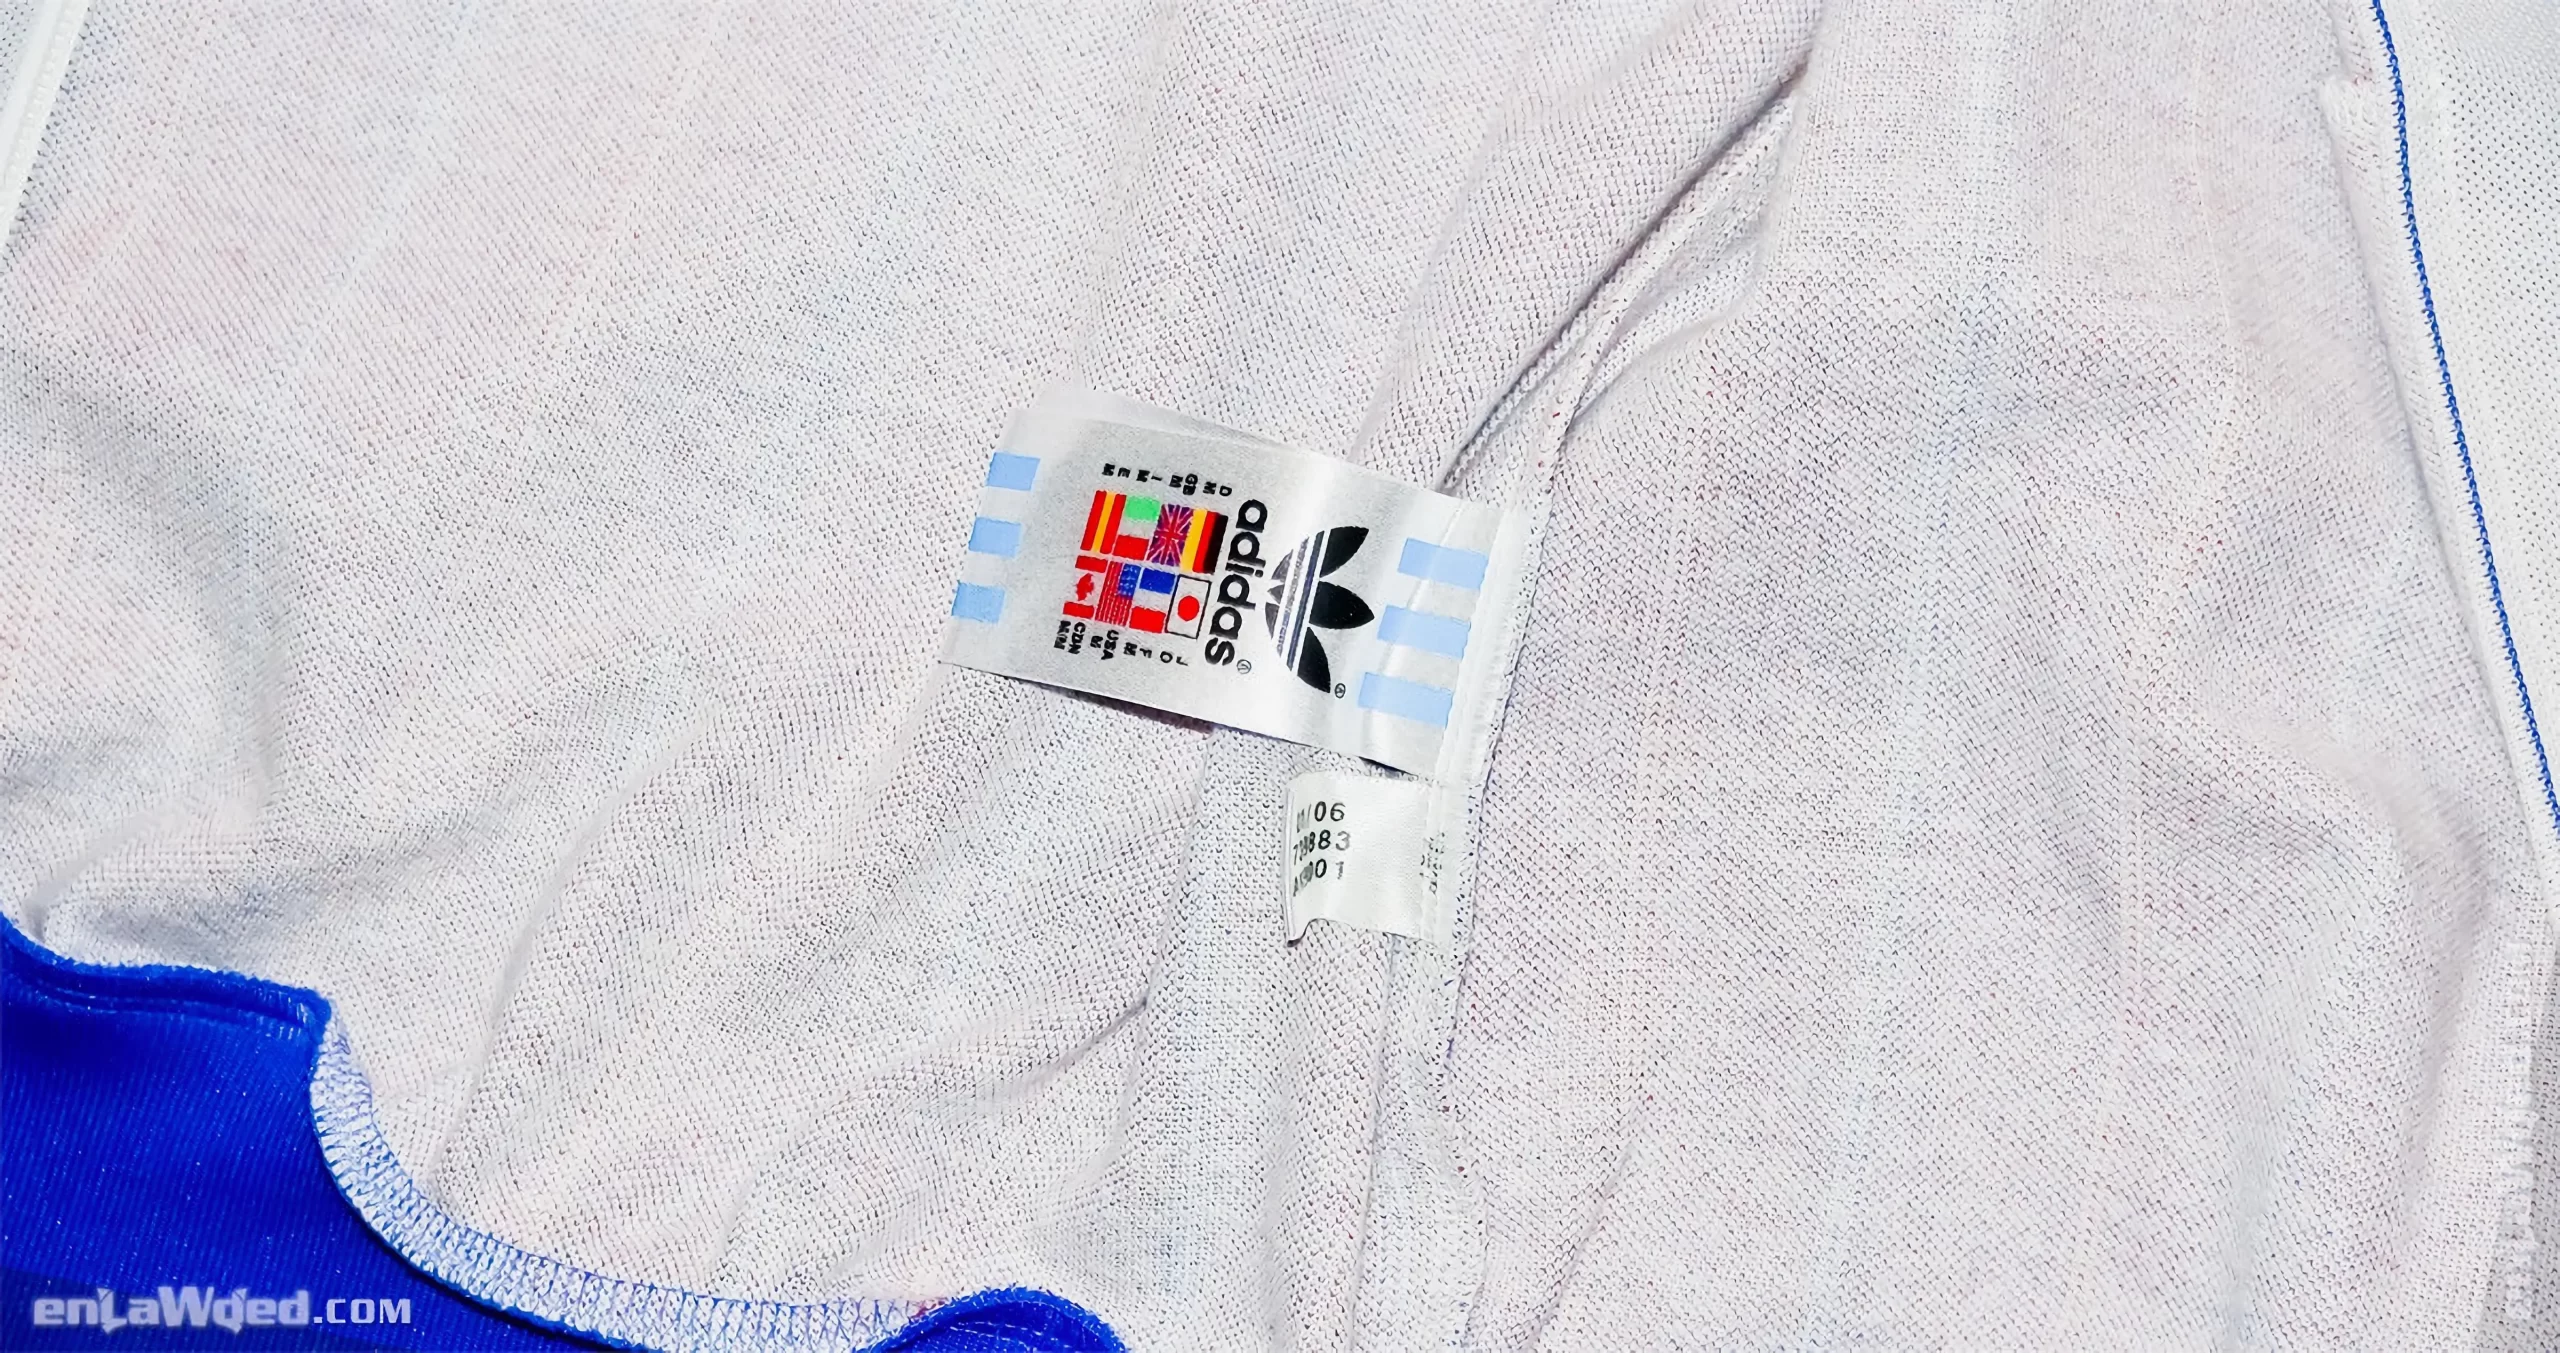 Adidas tag of the France Carré Magique 1982 Track Top, with the month and year of fabrication: 01/2006